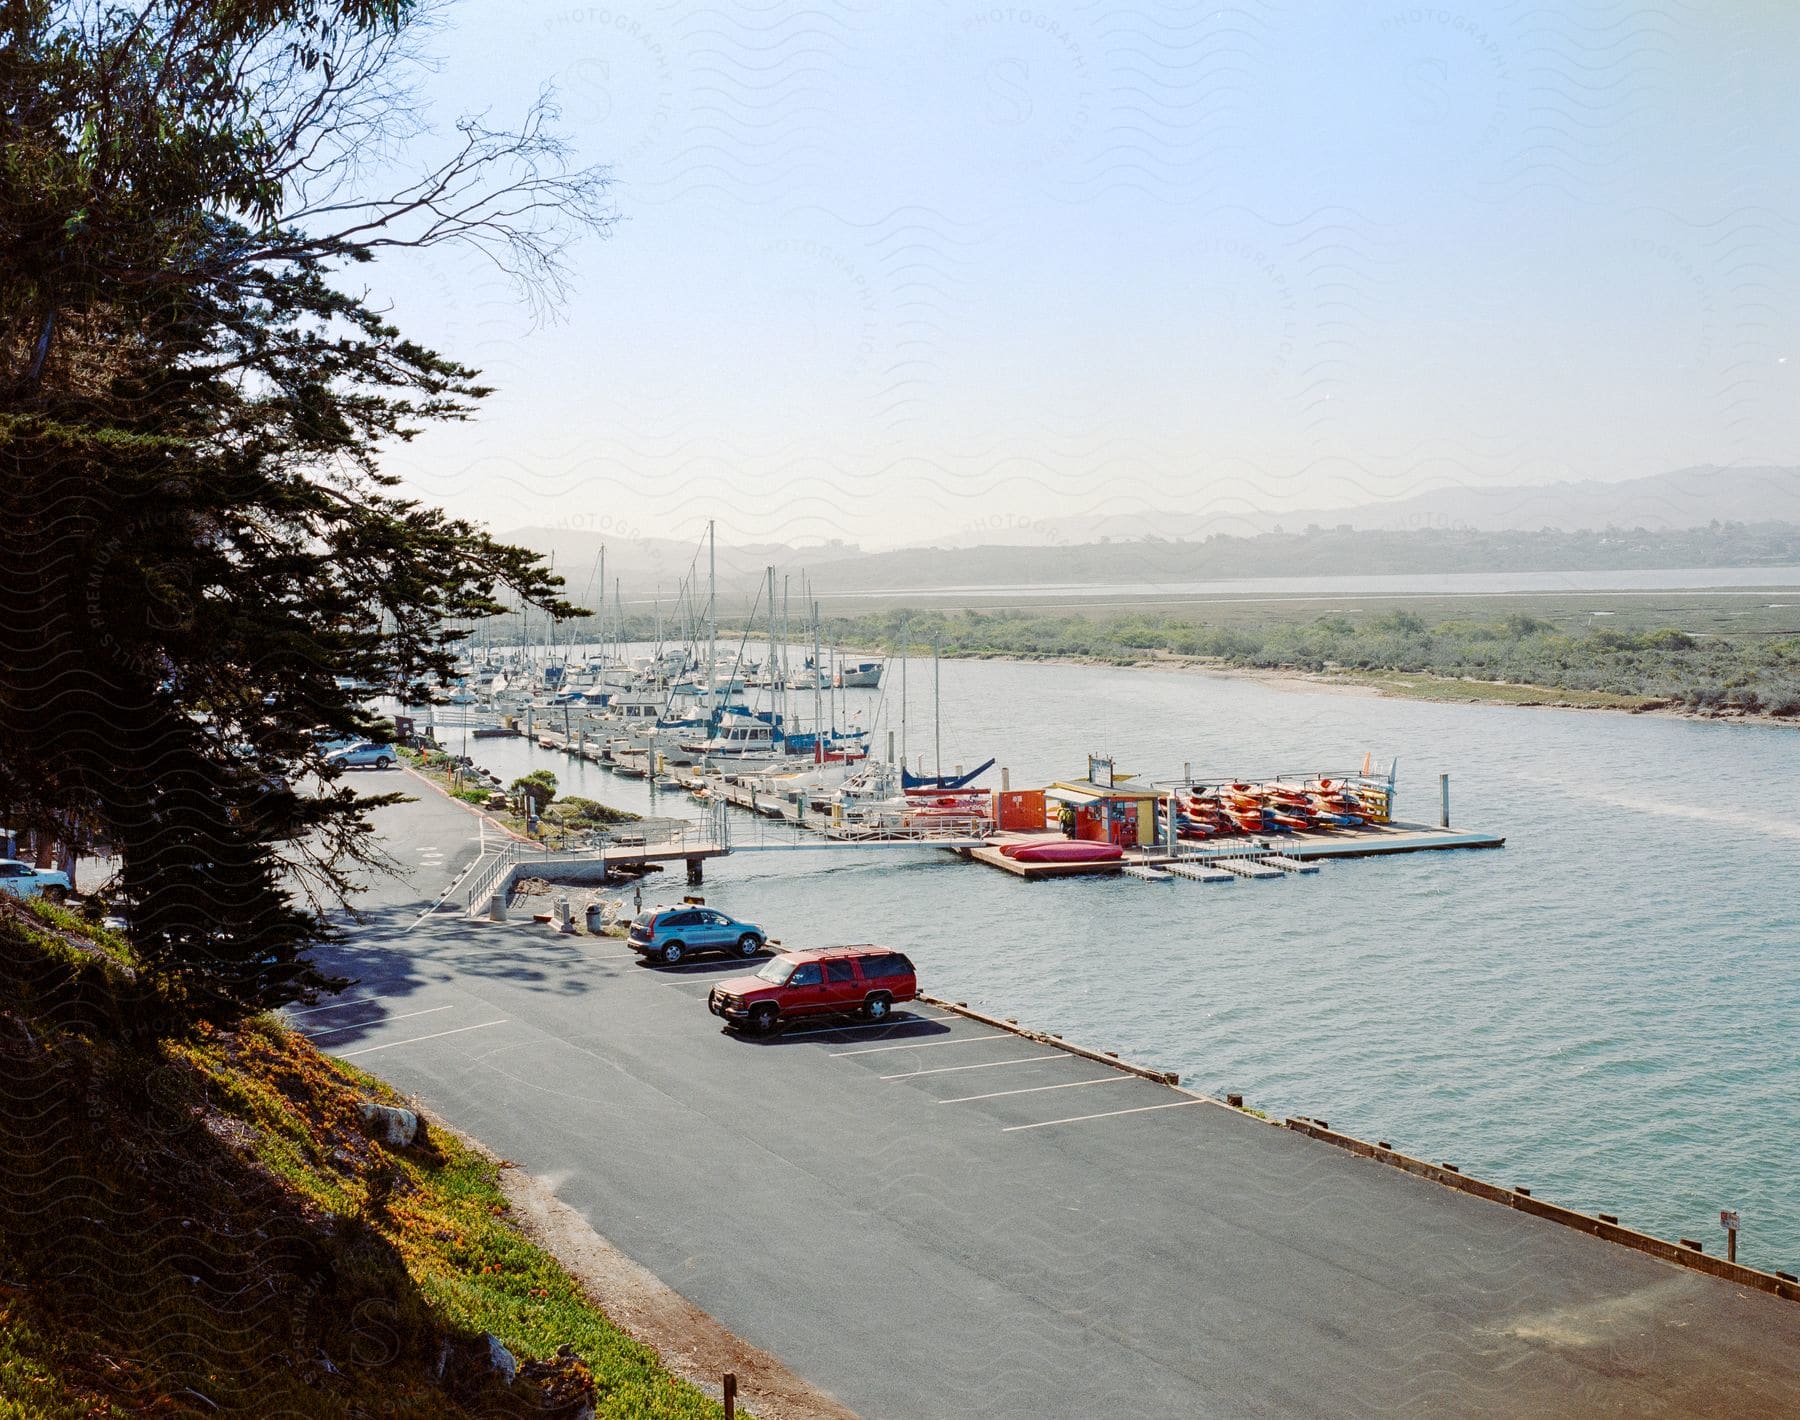 Overlooking a marina with rows of docked boats, a parking lot to the side with two vehicles, and hills in the distance.